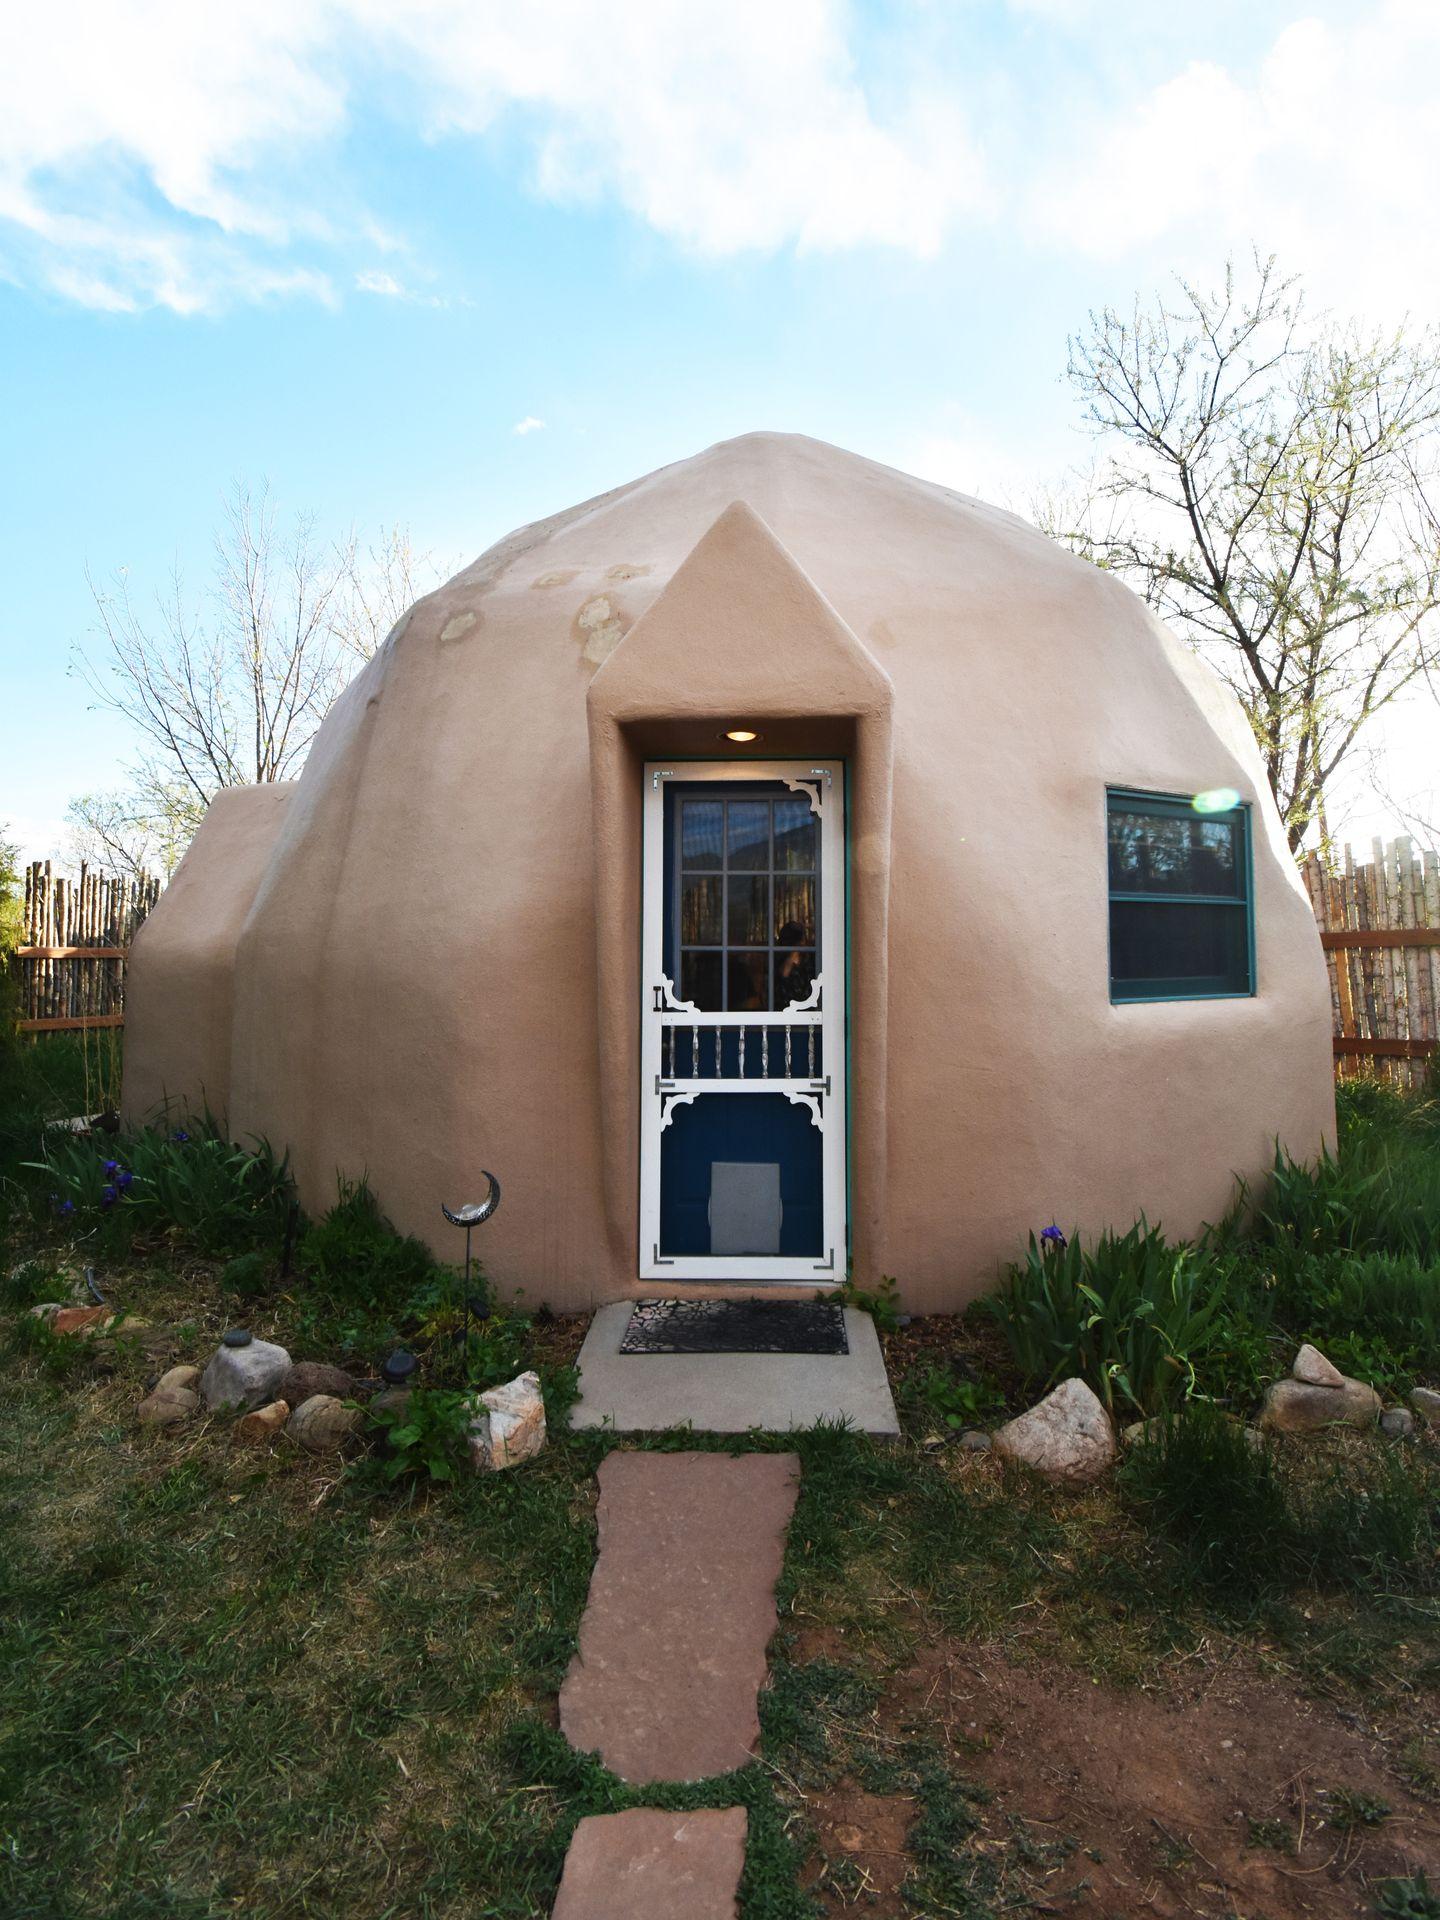 The exterior of a natural-colored Dome House in Taos.